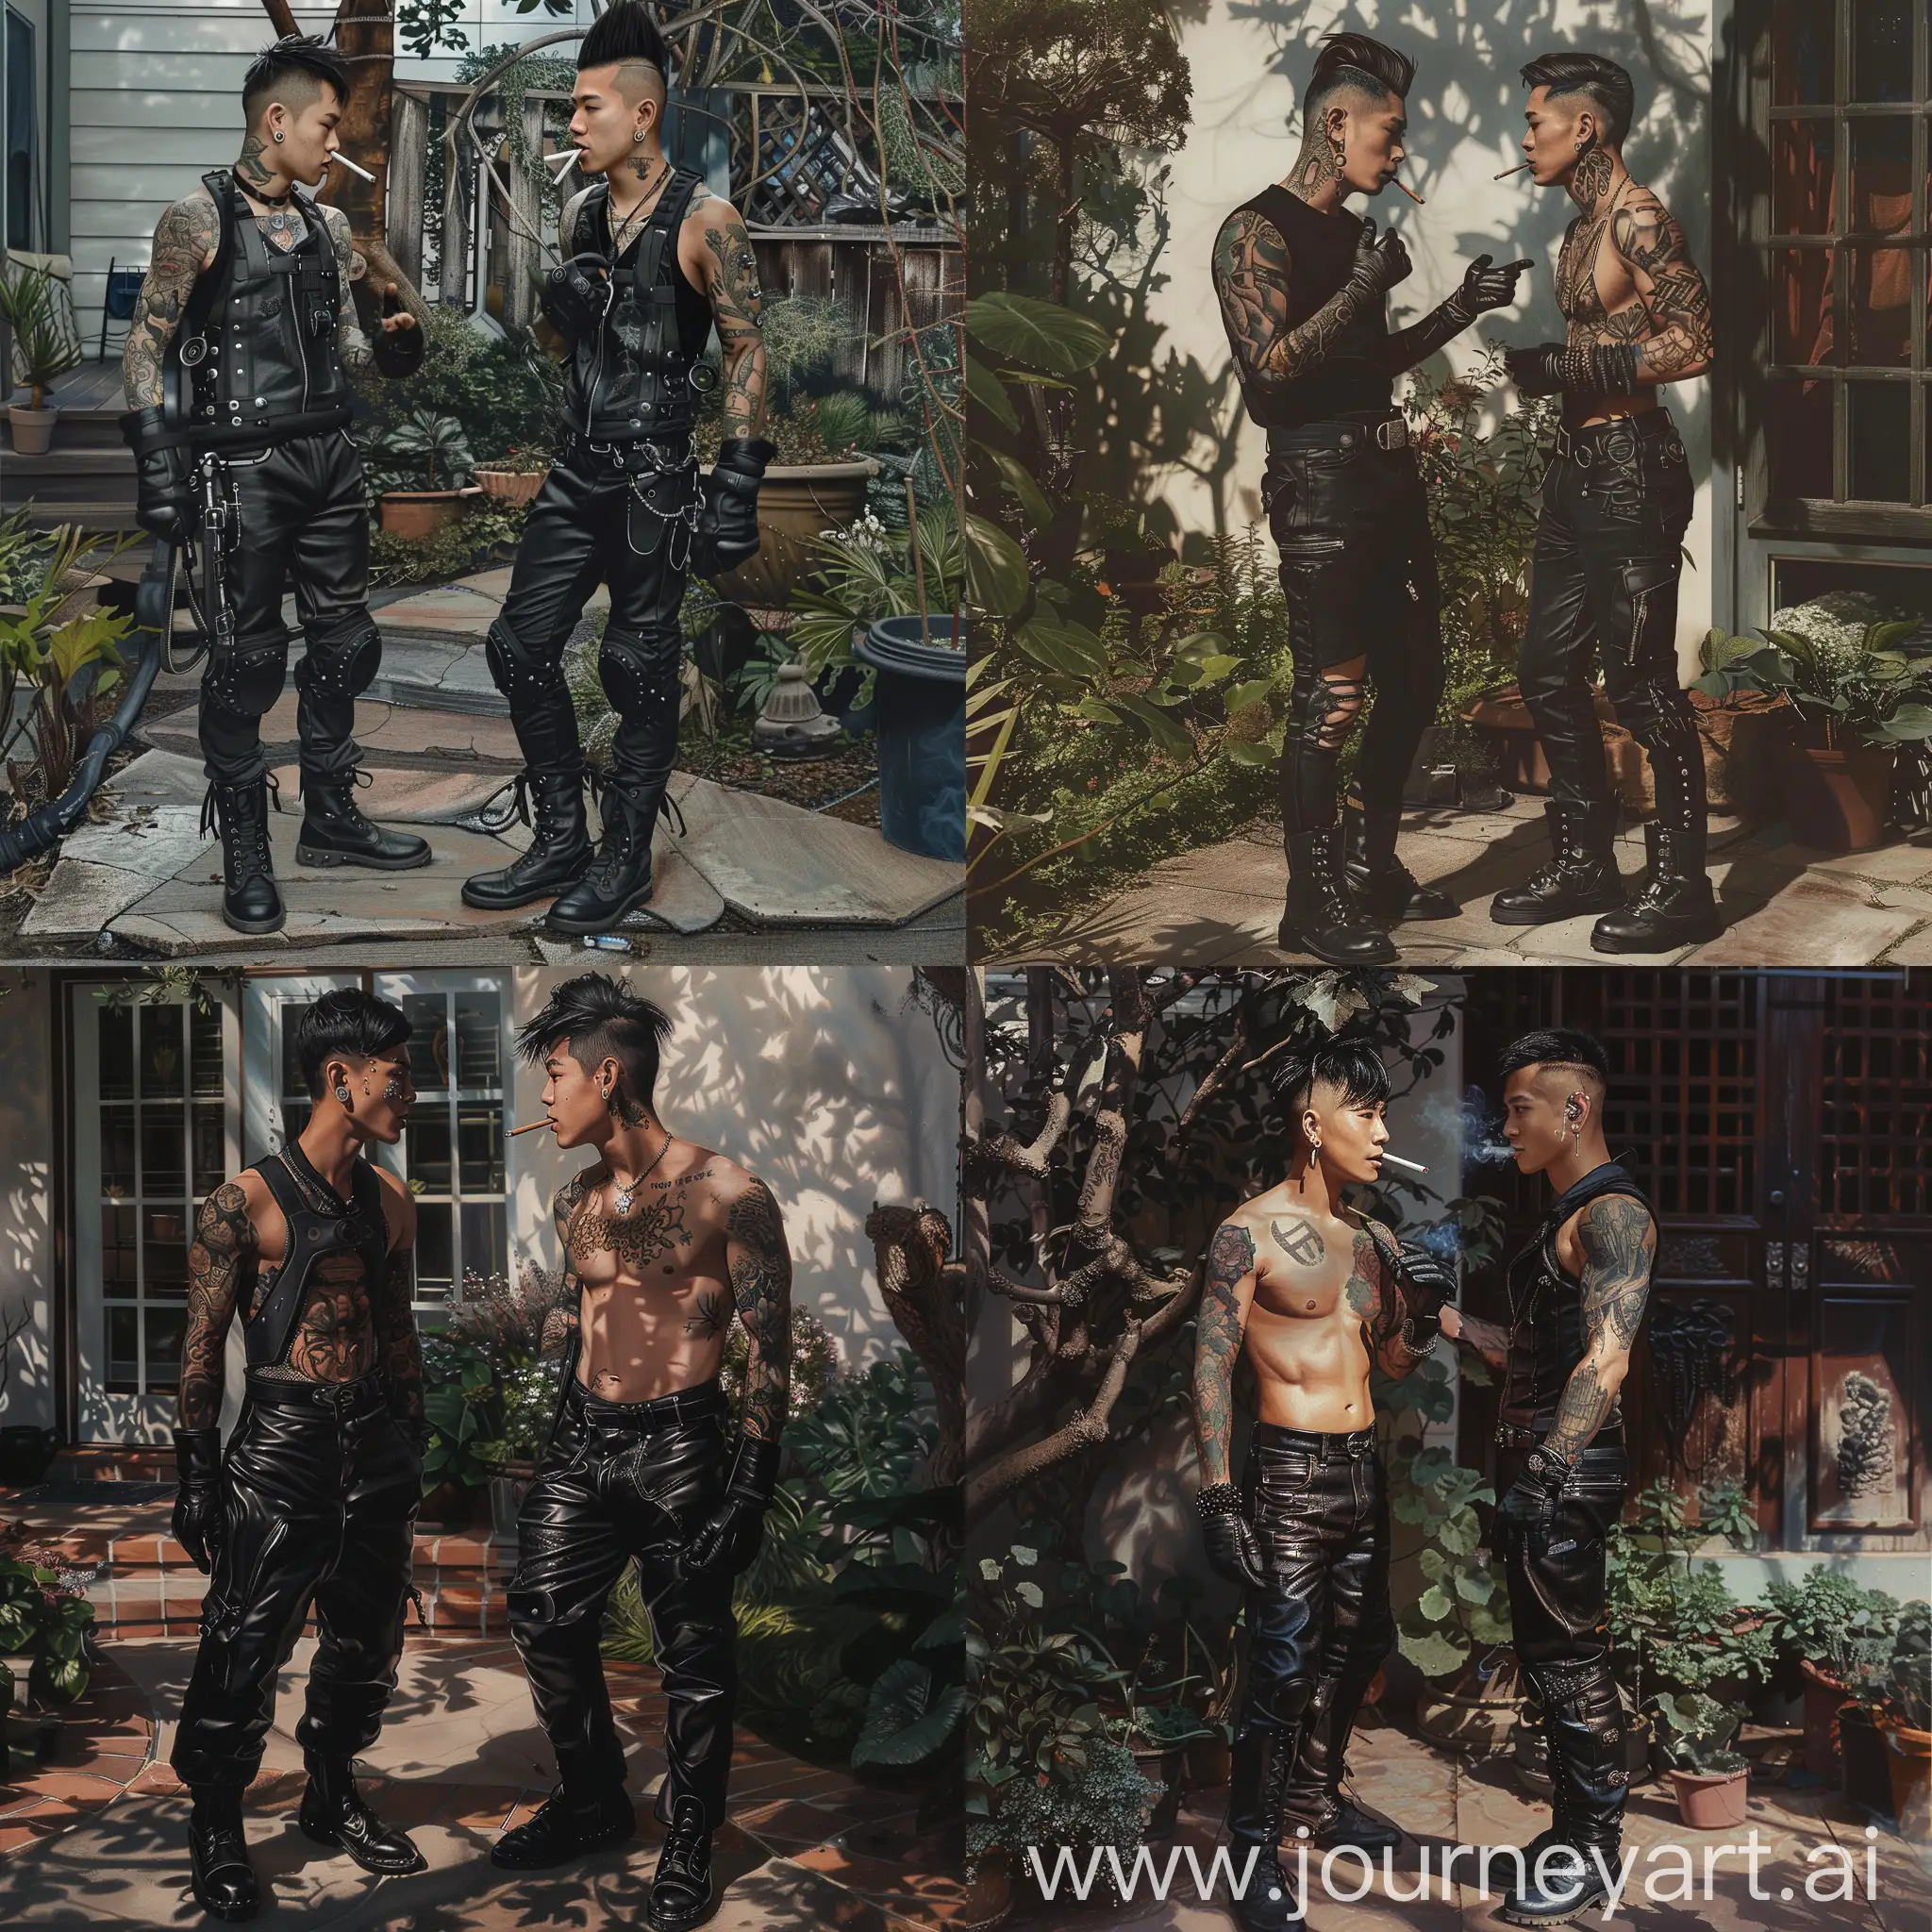 Two-Asian-Men-in-Garden-Conversation-Sporting-Leather-and-Tattoos